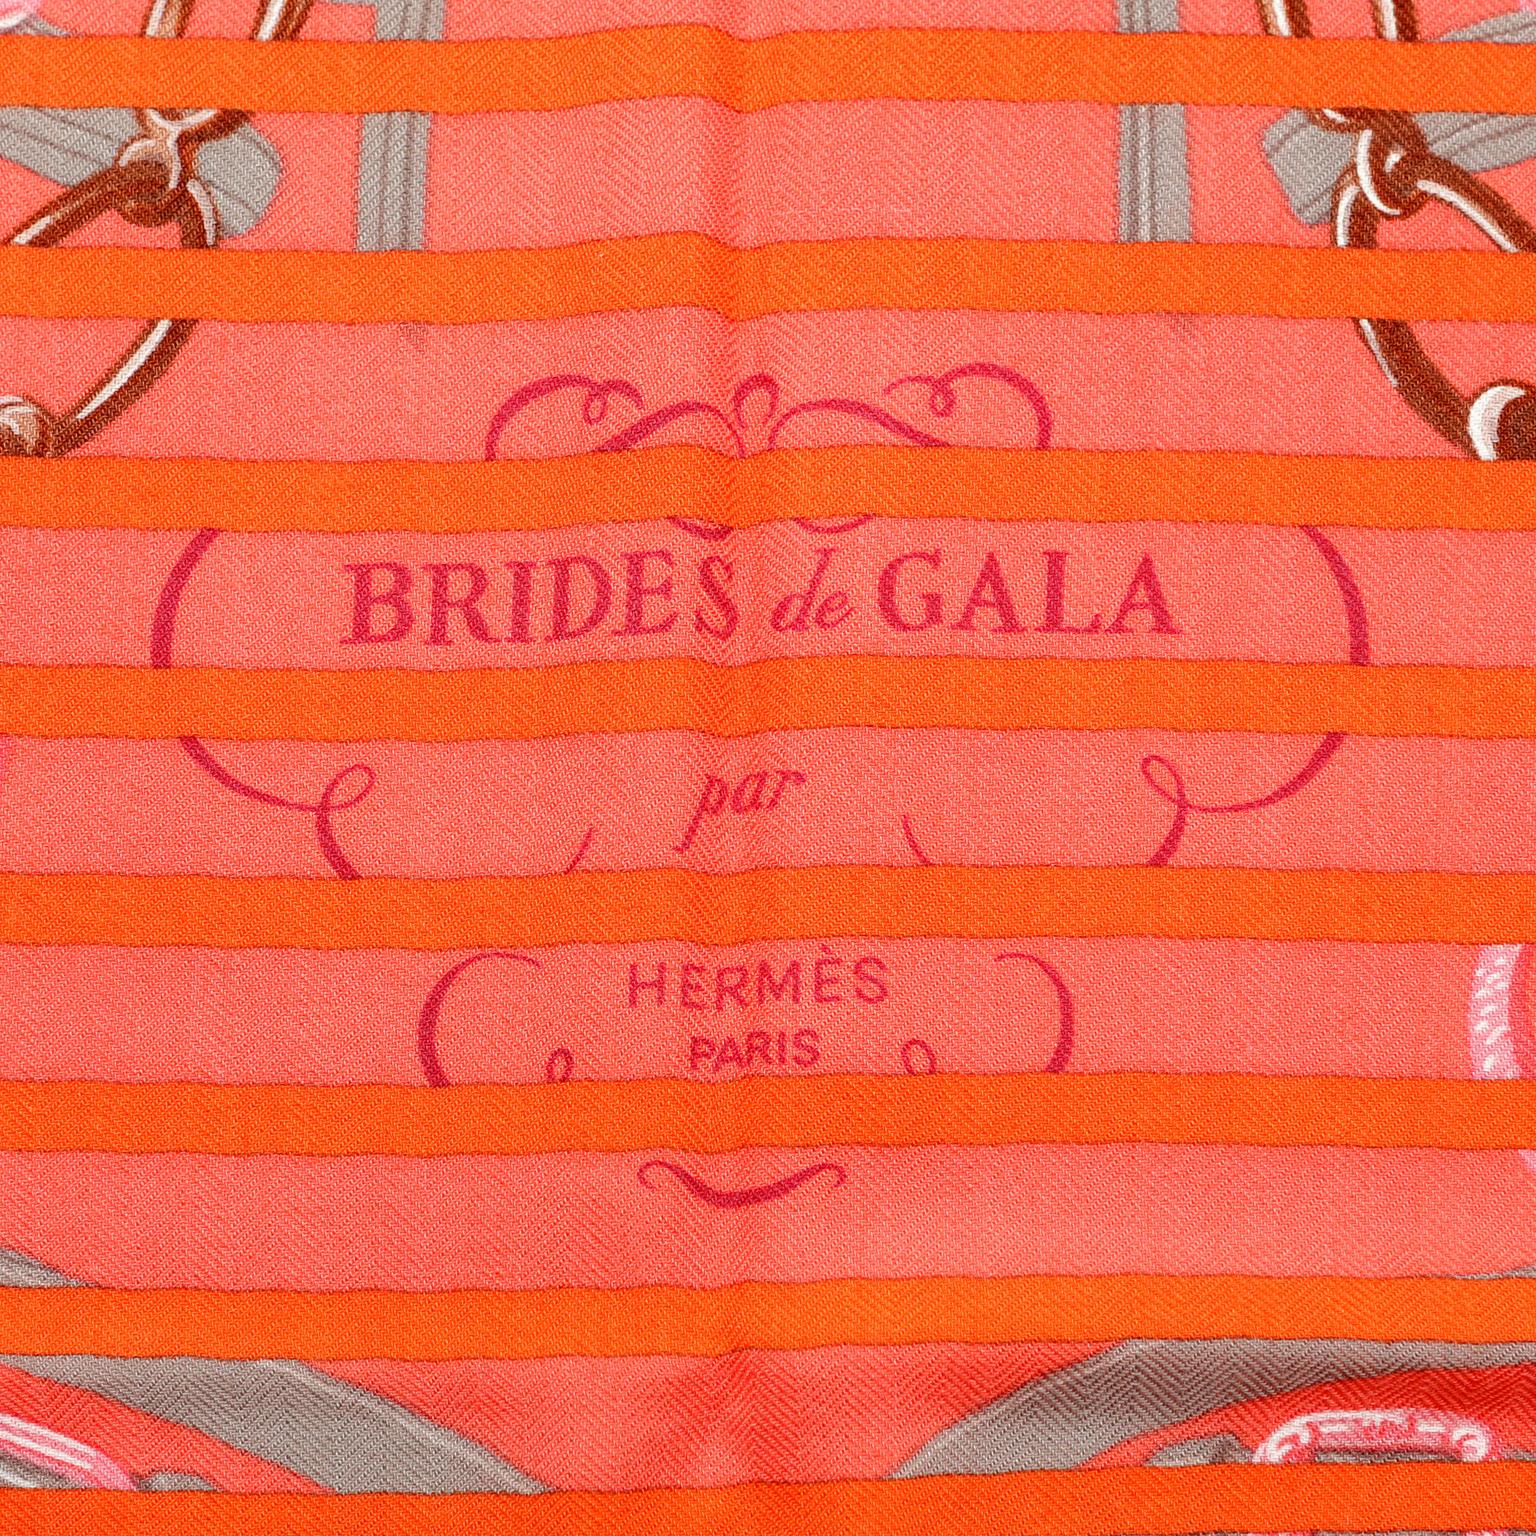 Hermès Red Brides De Gala Cashmere Silk GM Shawl- PRISTINE; never worn.  
Versatile and collectible, the vibrant colors of this classic print are highly desirable. 
Equestrian theme featuring saddles, belts and stirrups. Red with orange striping,